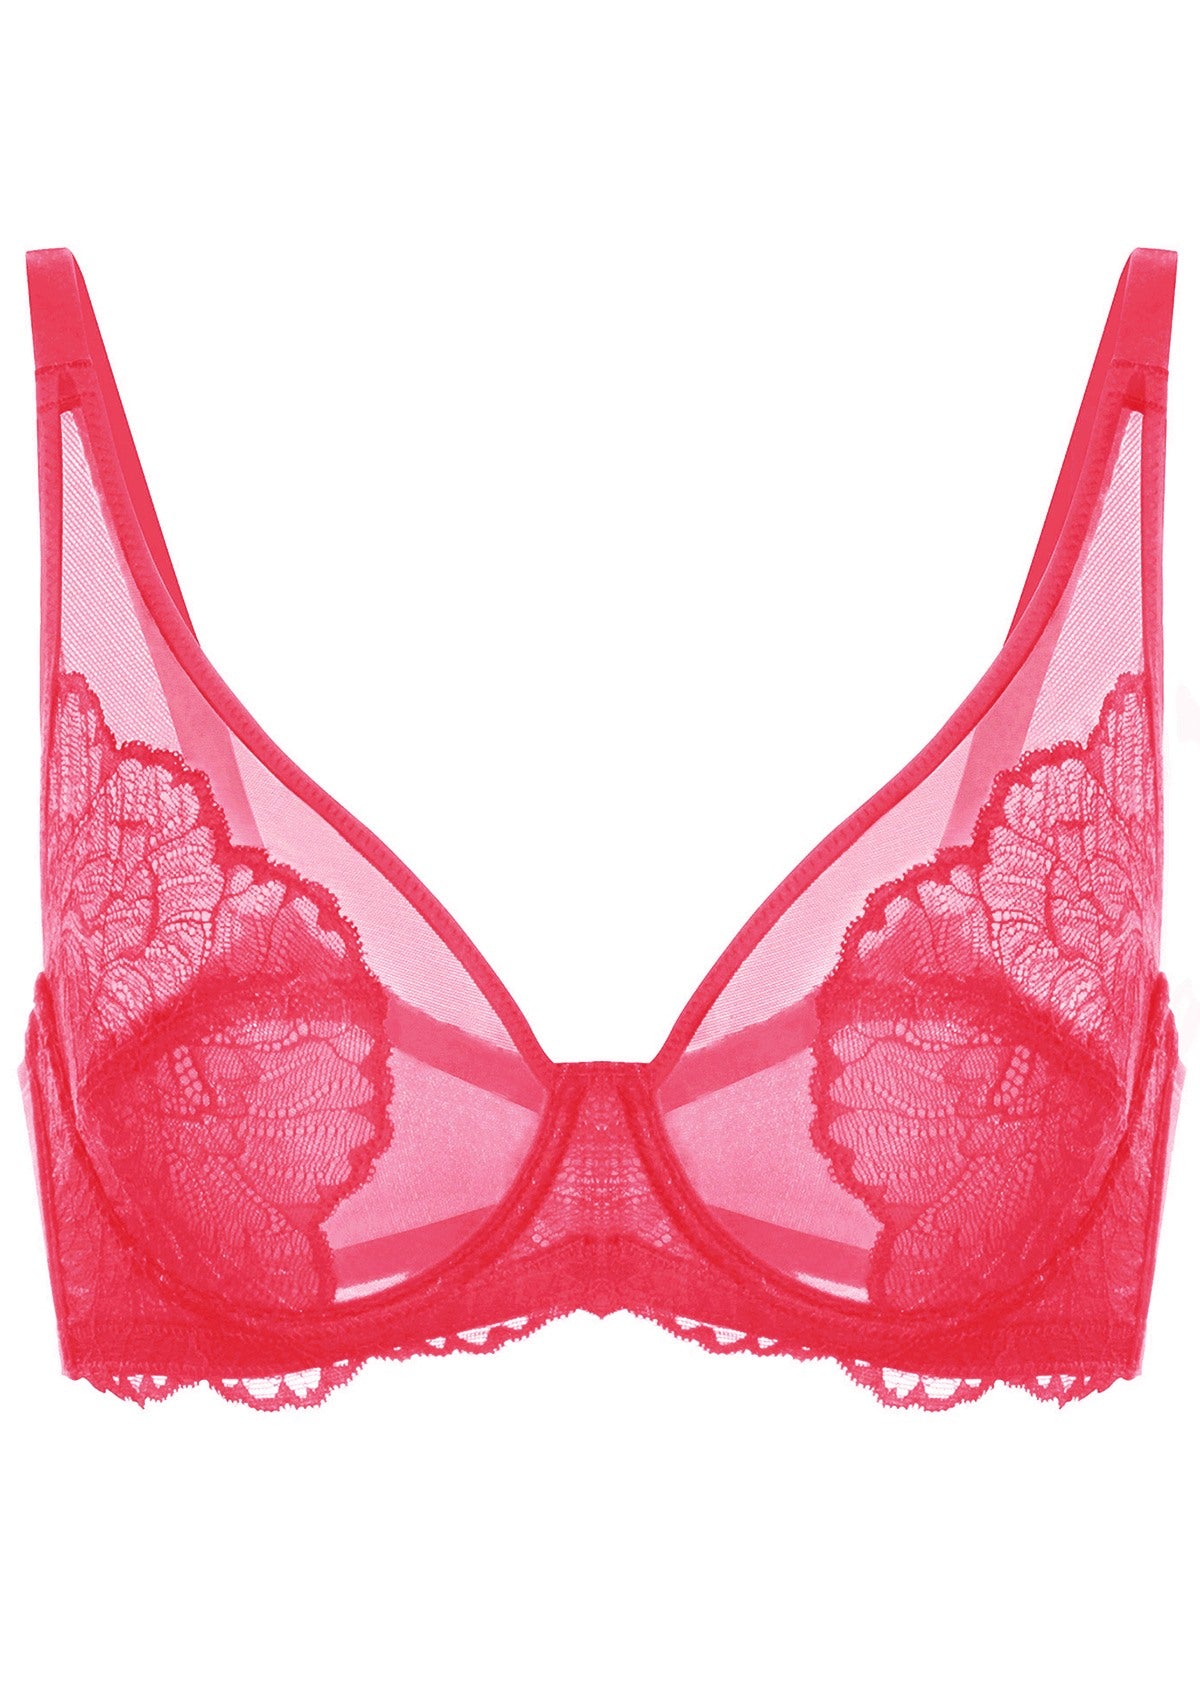 HSIA Blossom Unlined Lace Underwire Bra - Raspberry / 42 / D